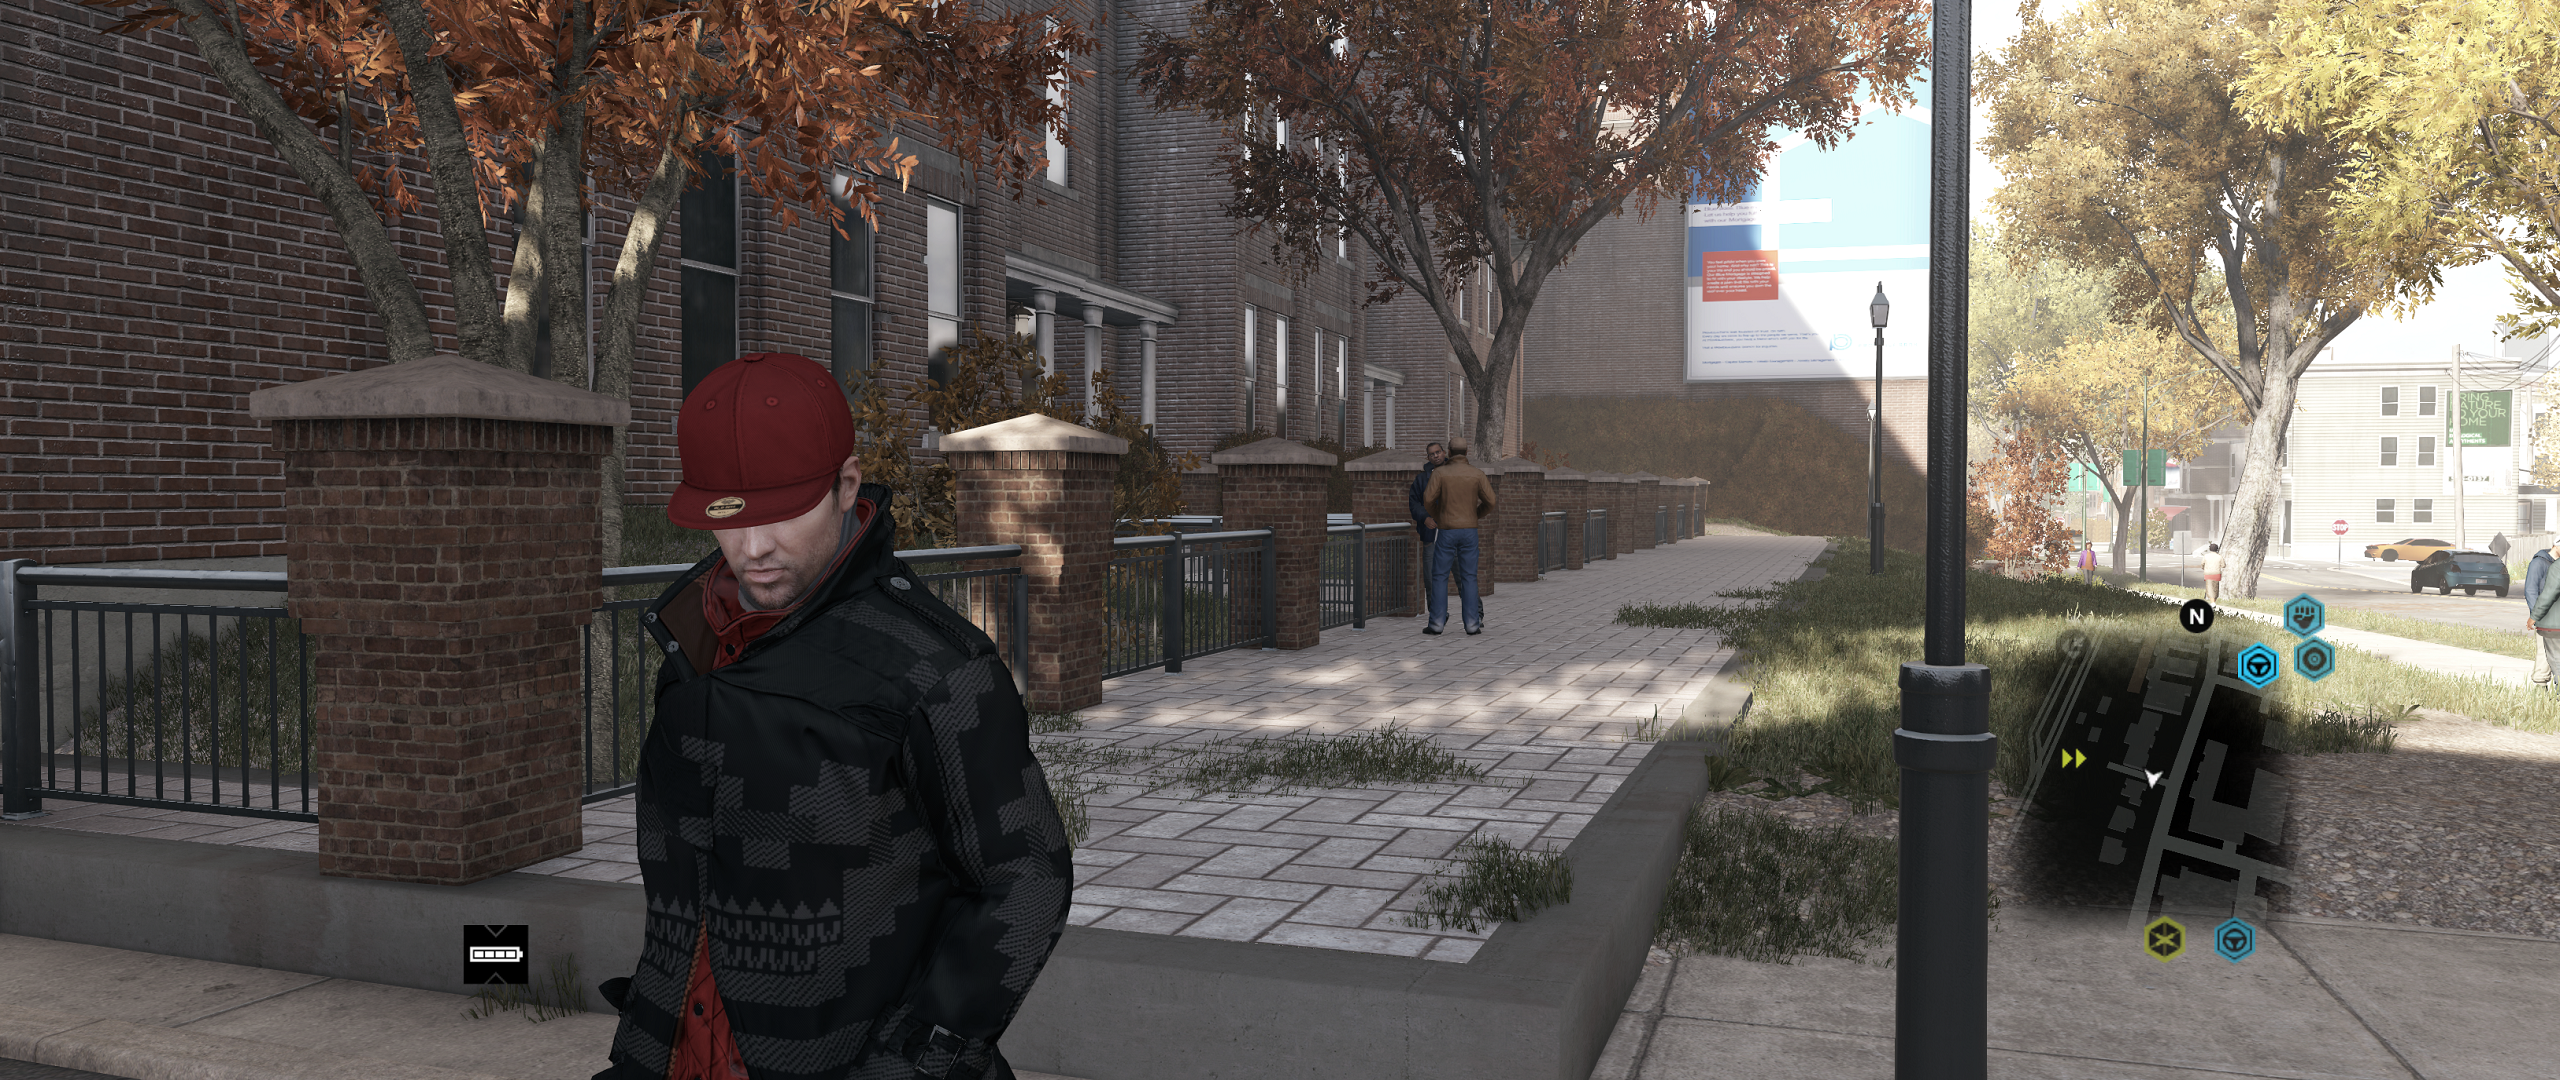 watch_dogs2014-06-162s7azo.png